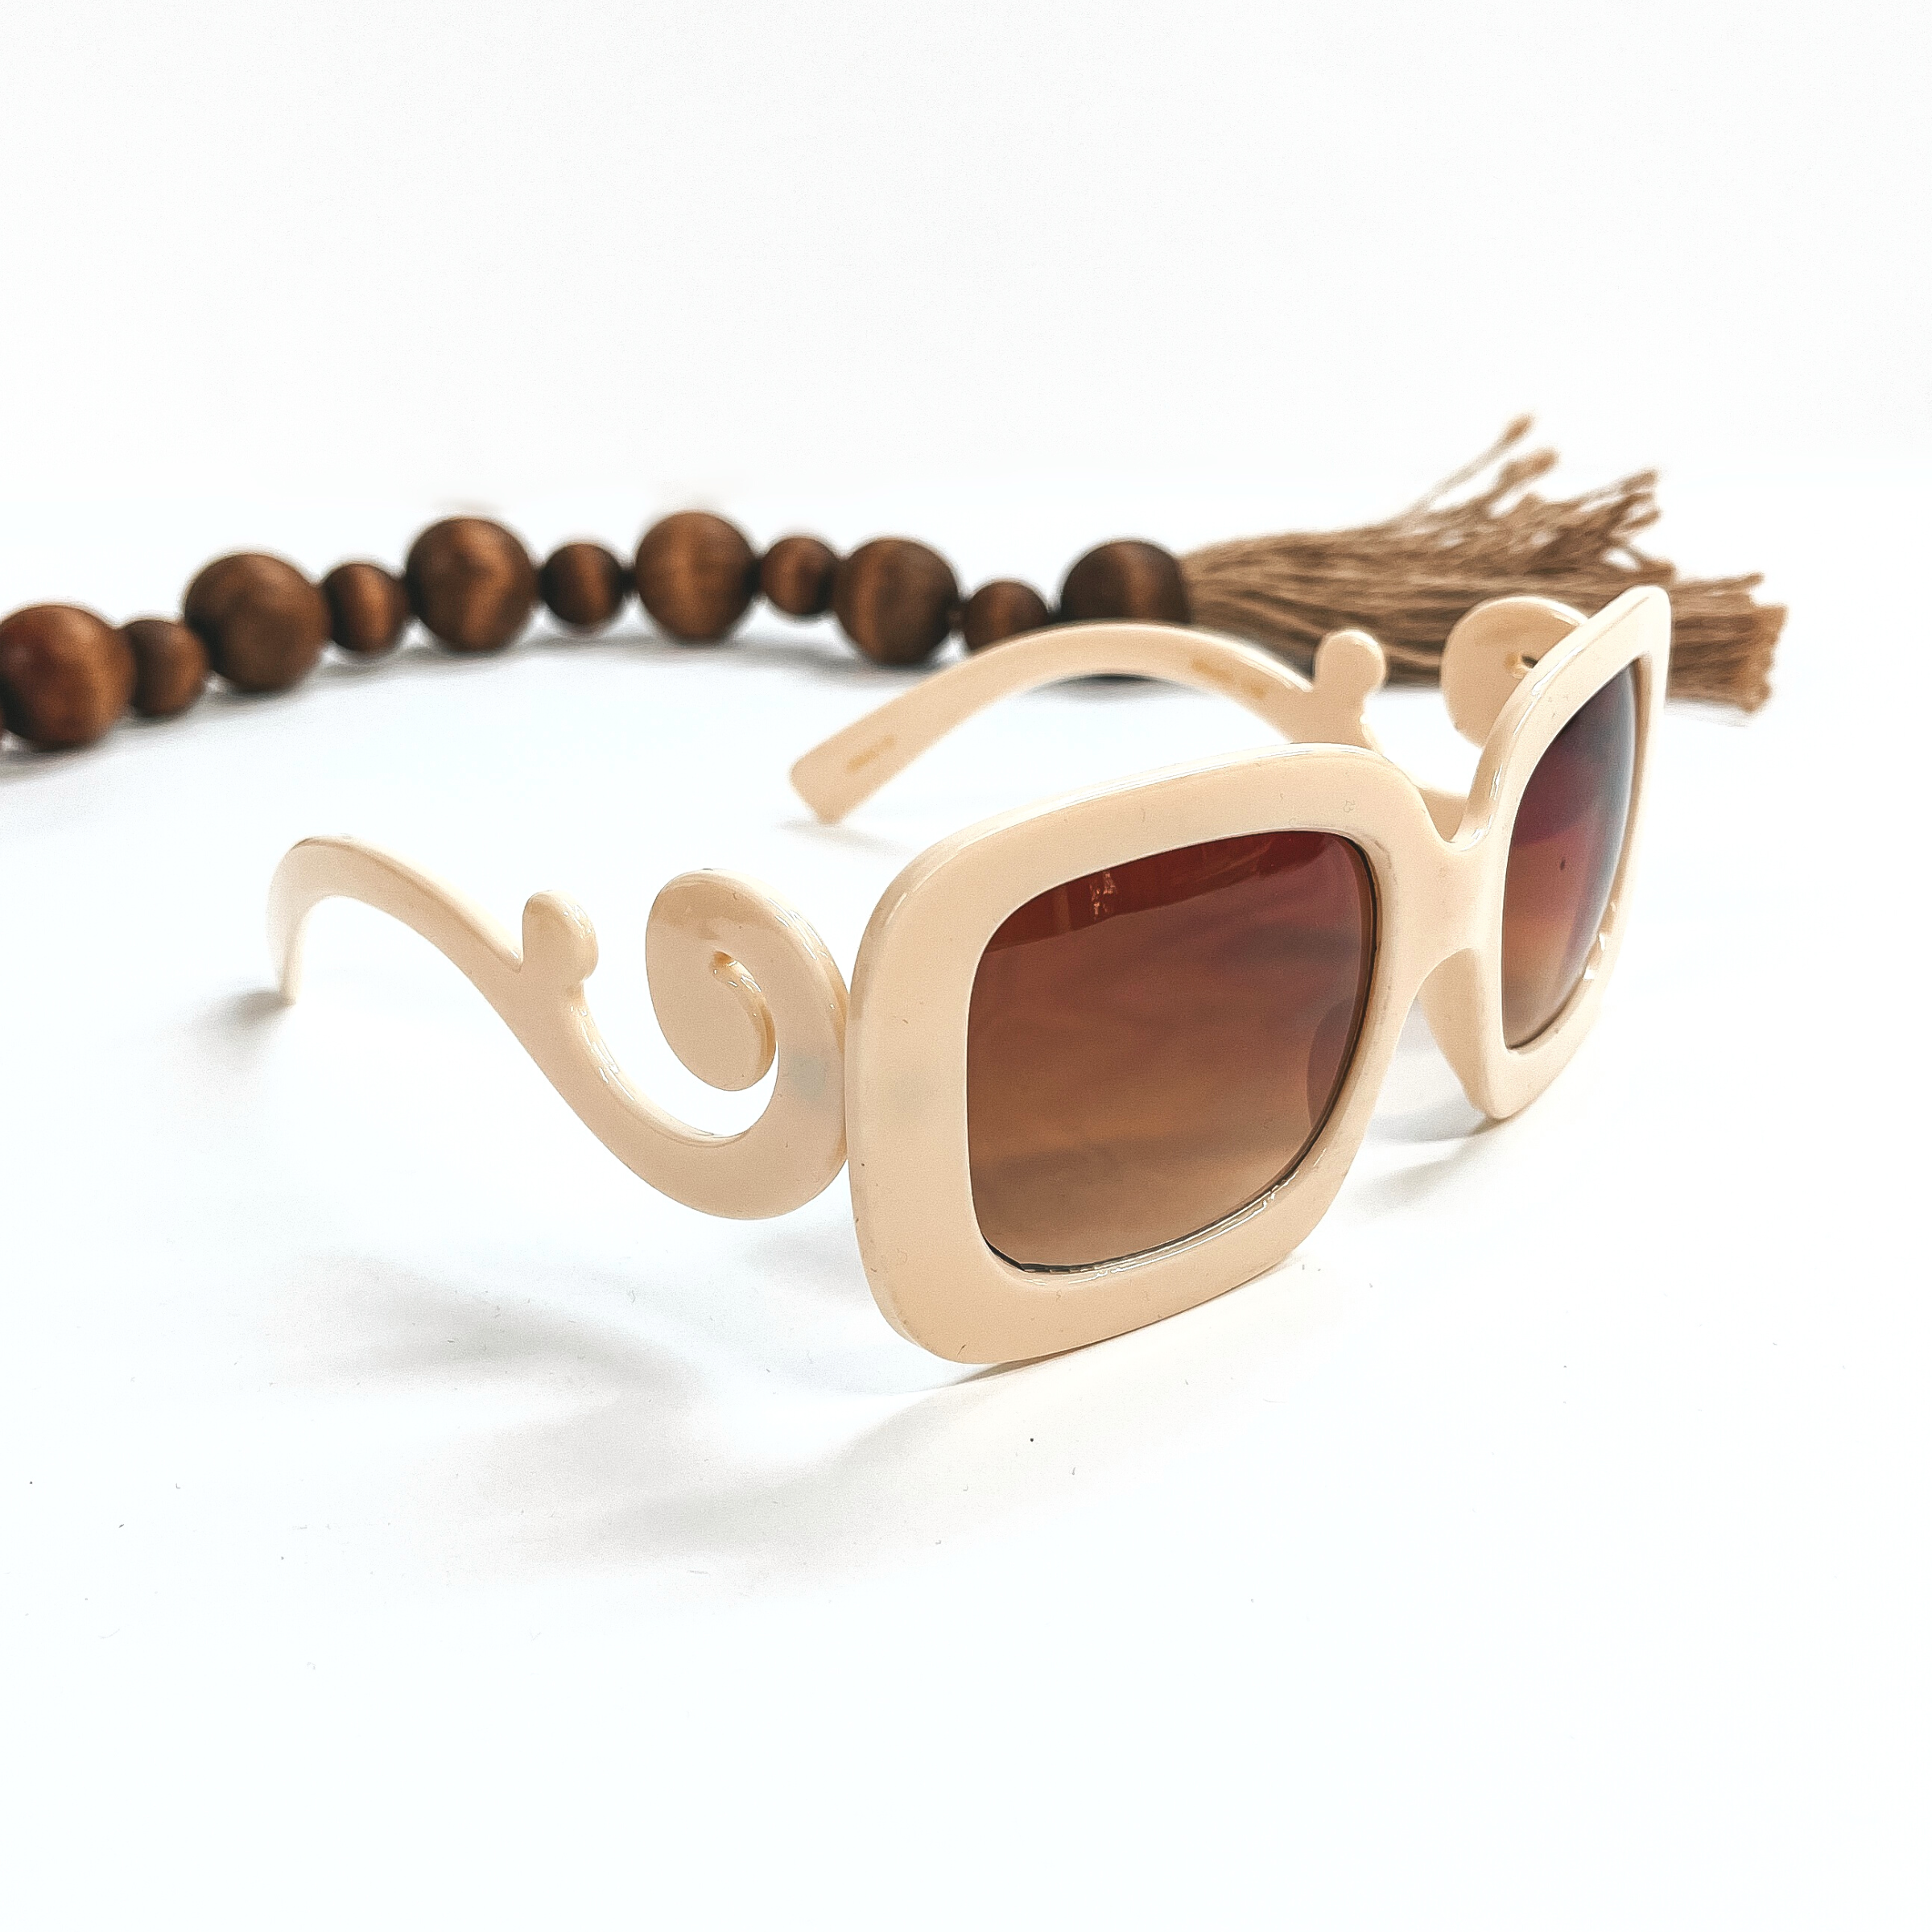 This a pair of cream frame sunglasses, square rounded shape with a brown  lense. The sides of the sunglasses have a large swirls. These sunglasses are taken  on a white background with dark brown beads and brown tassel in the back as decor.